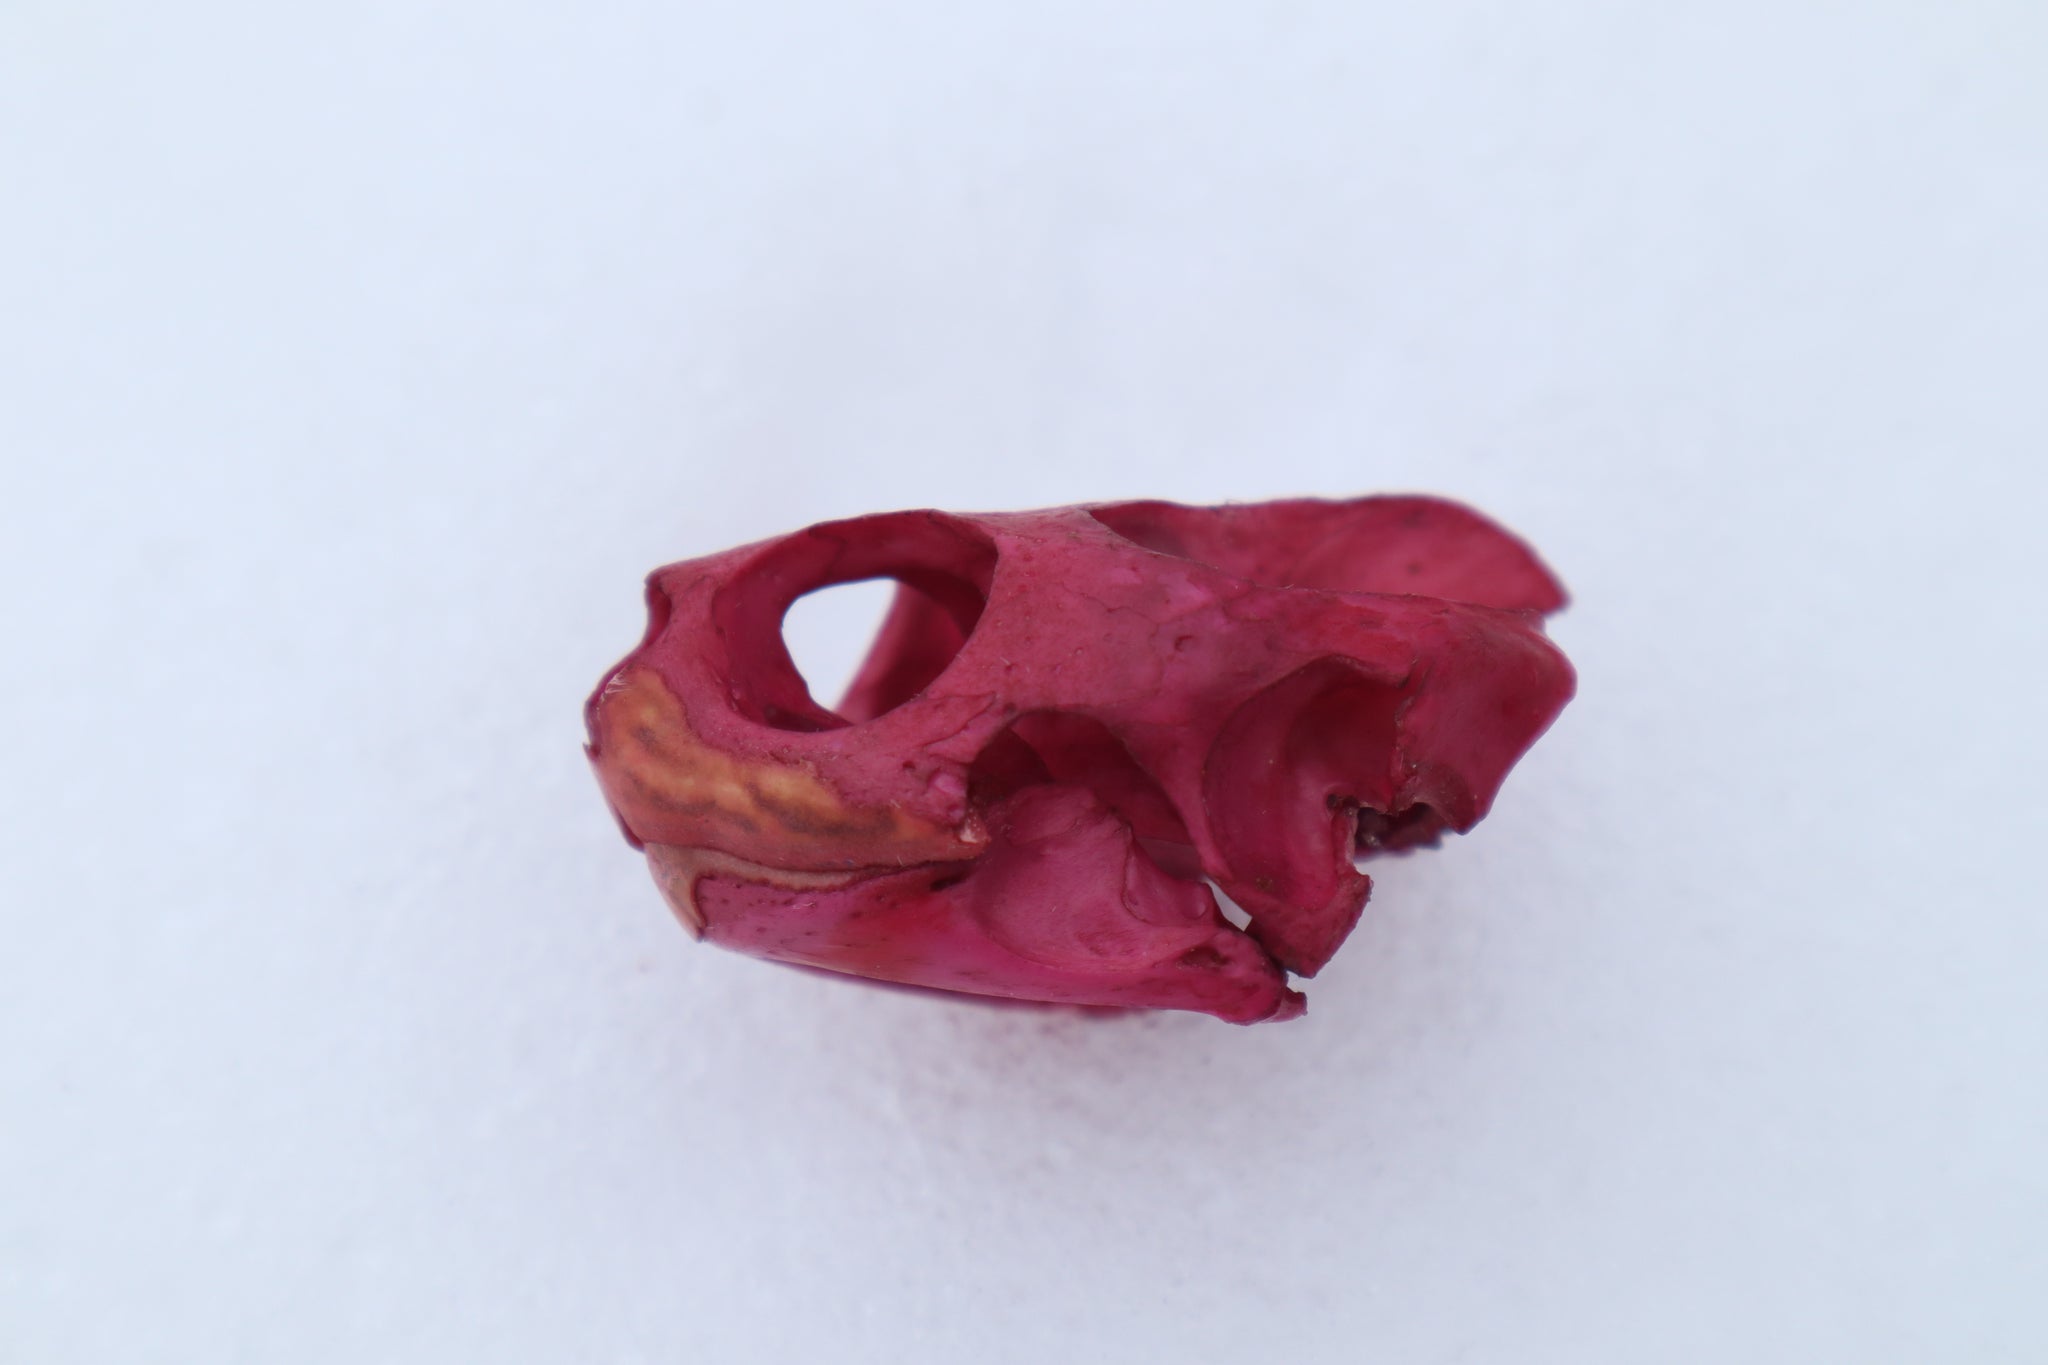 Naturally Stained Red Eared Slider Turtle Skull